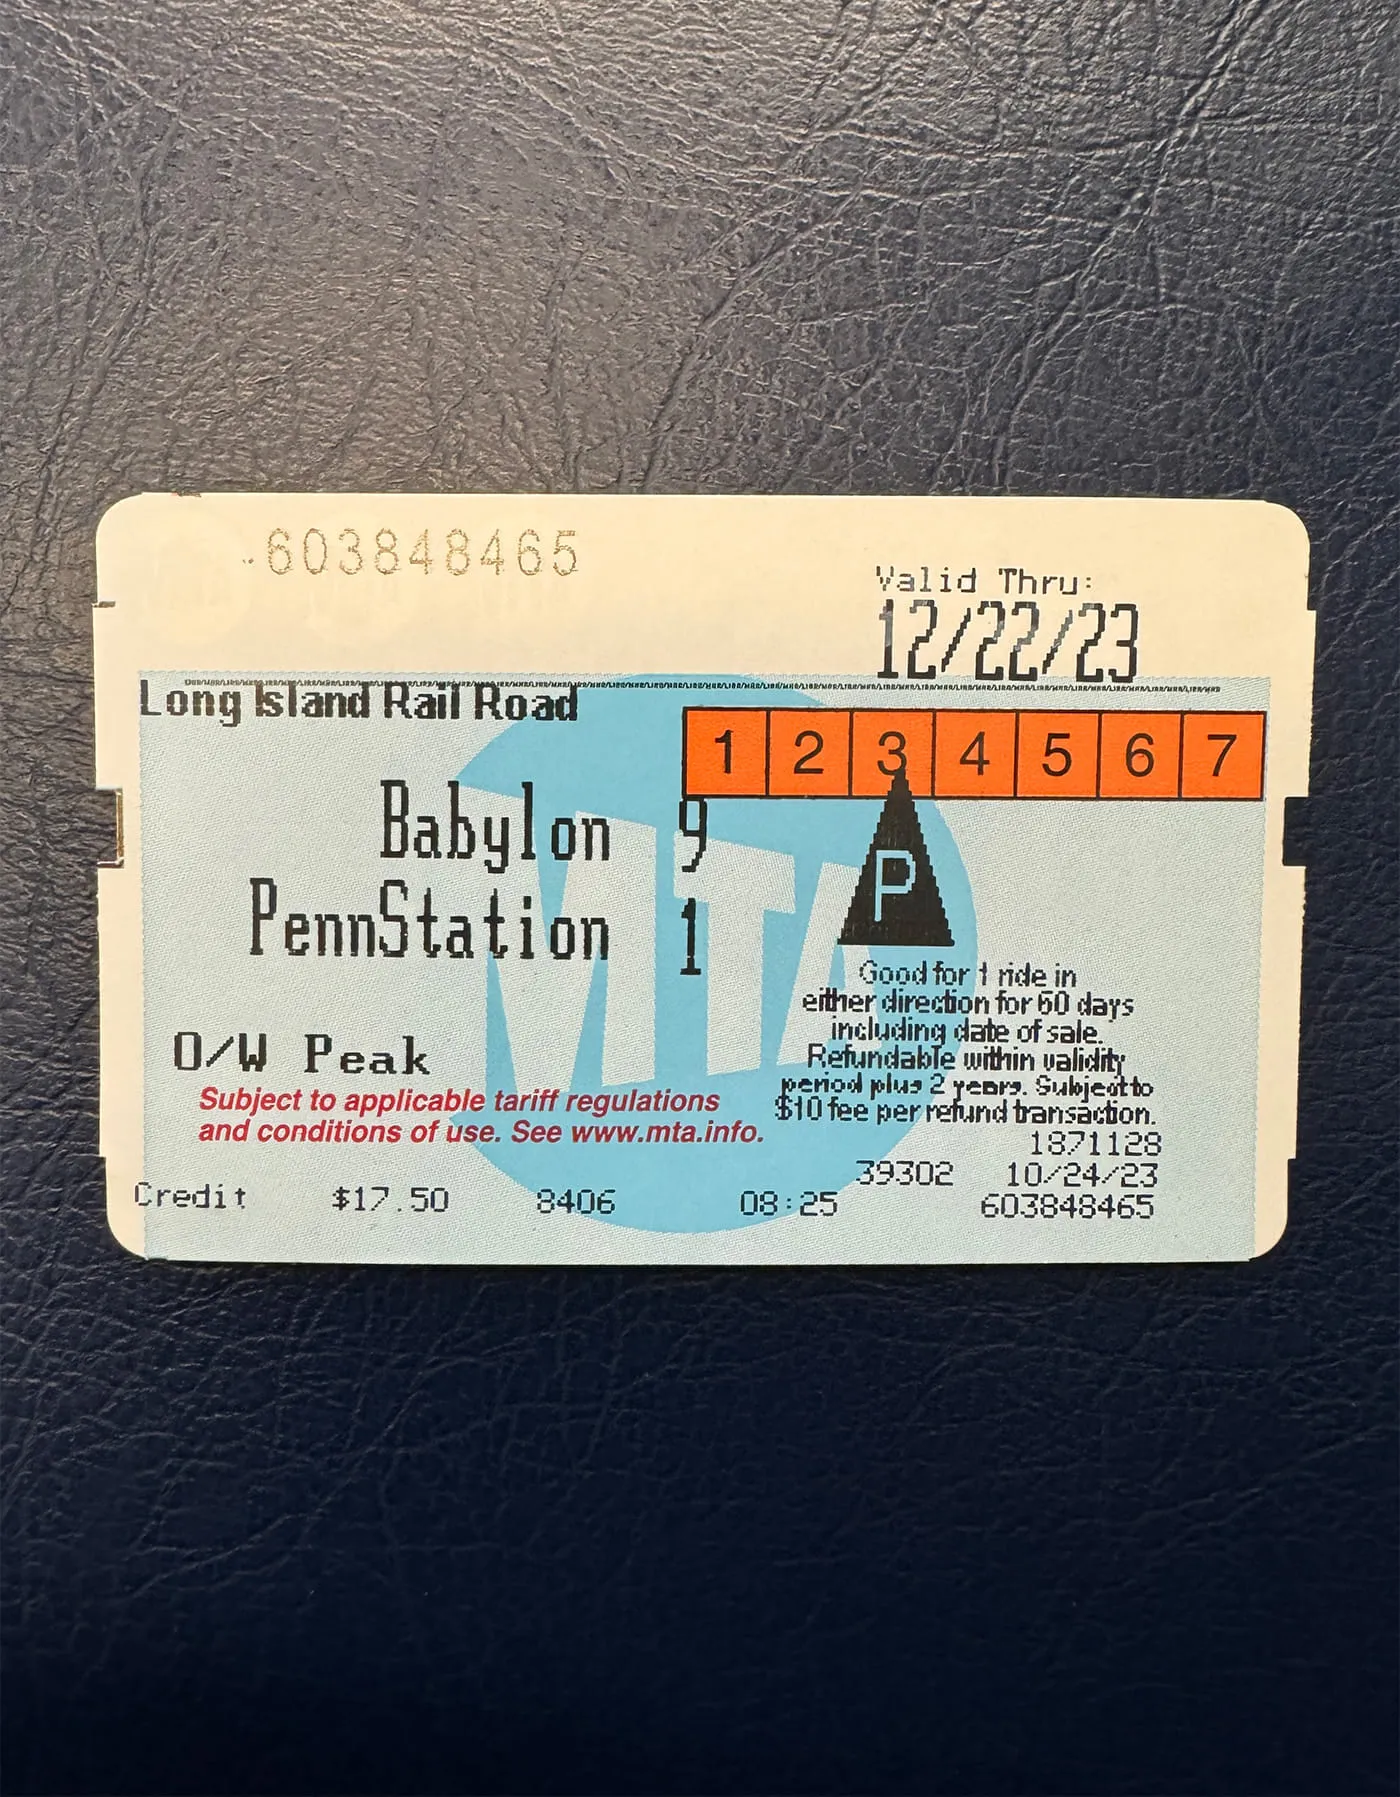 A physical paper LIRR ticket